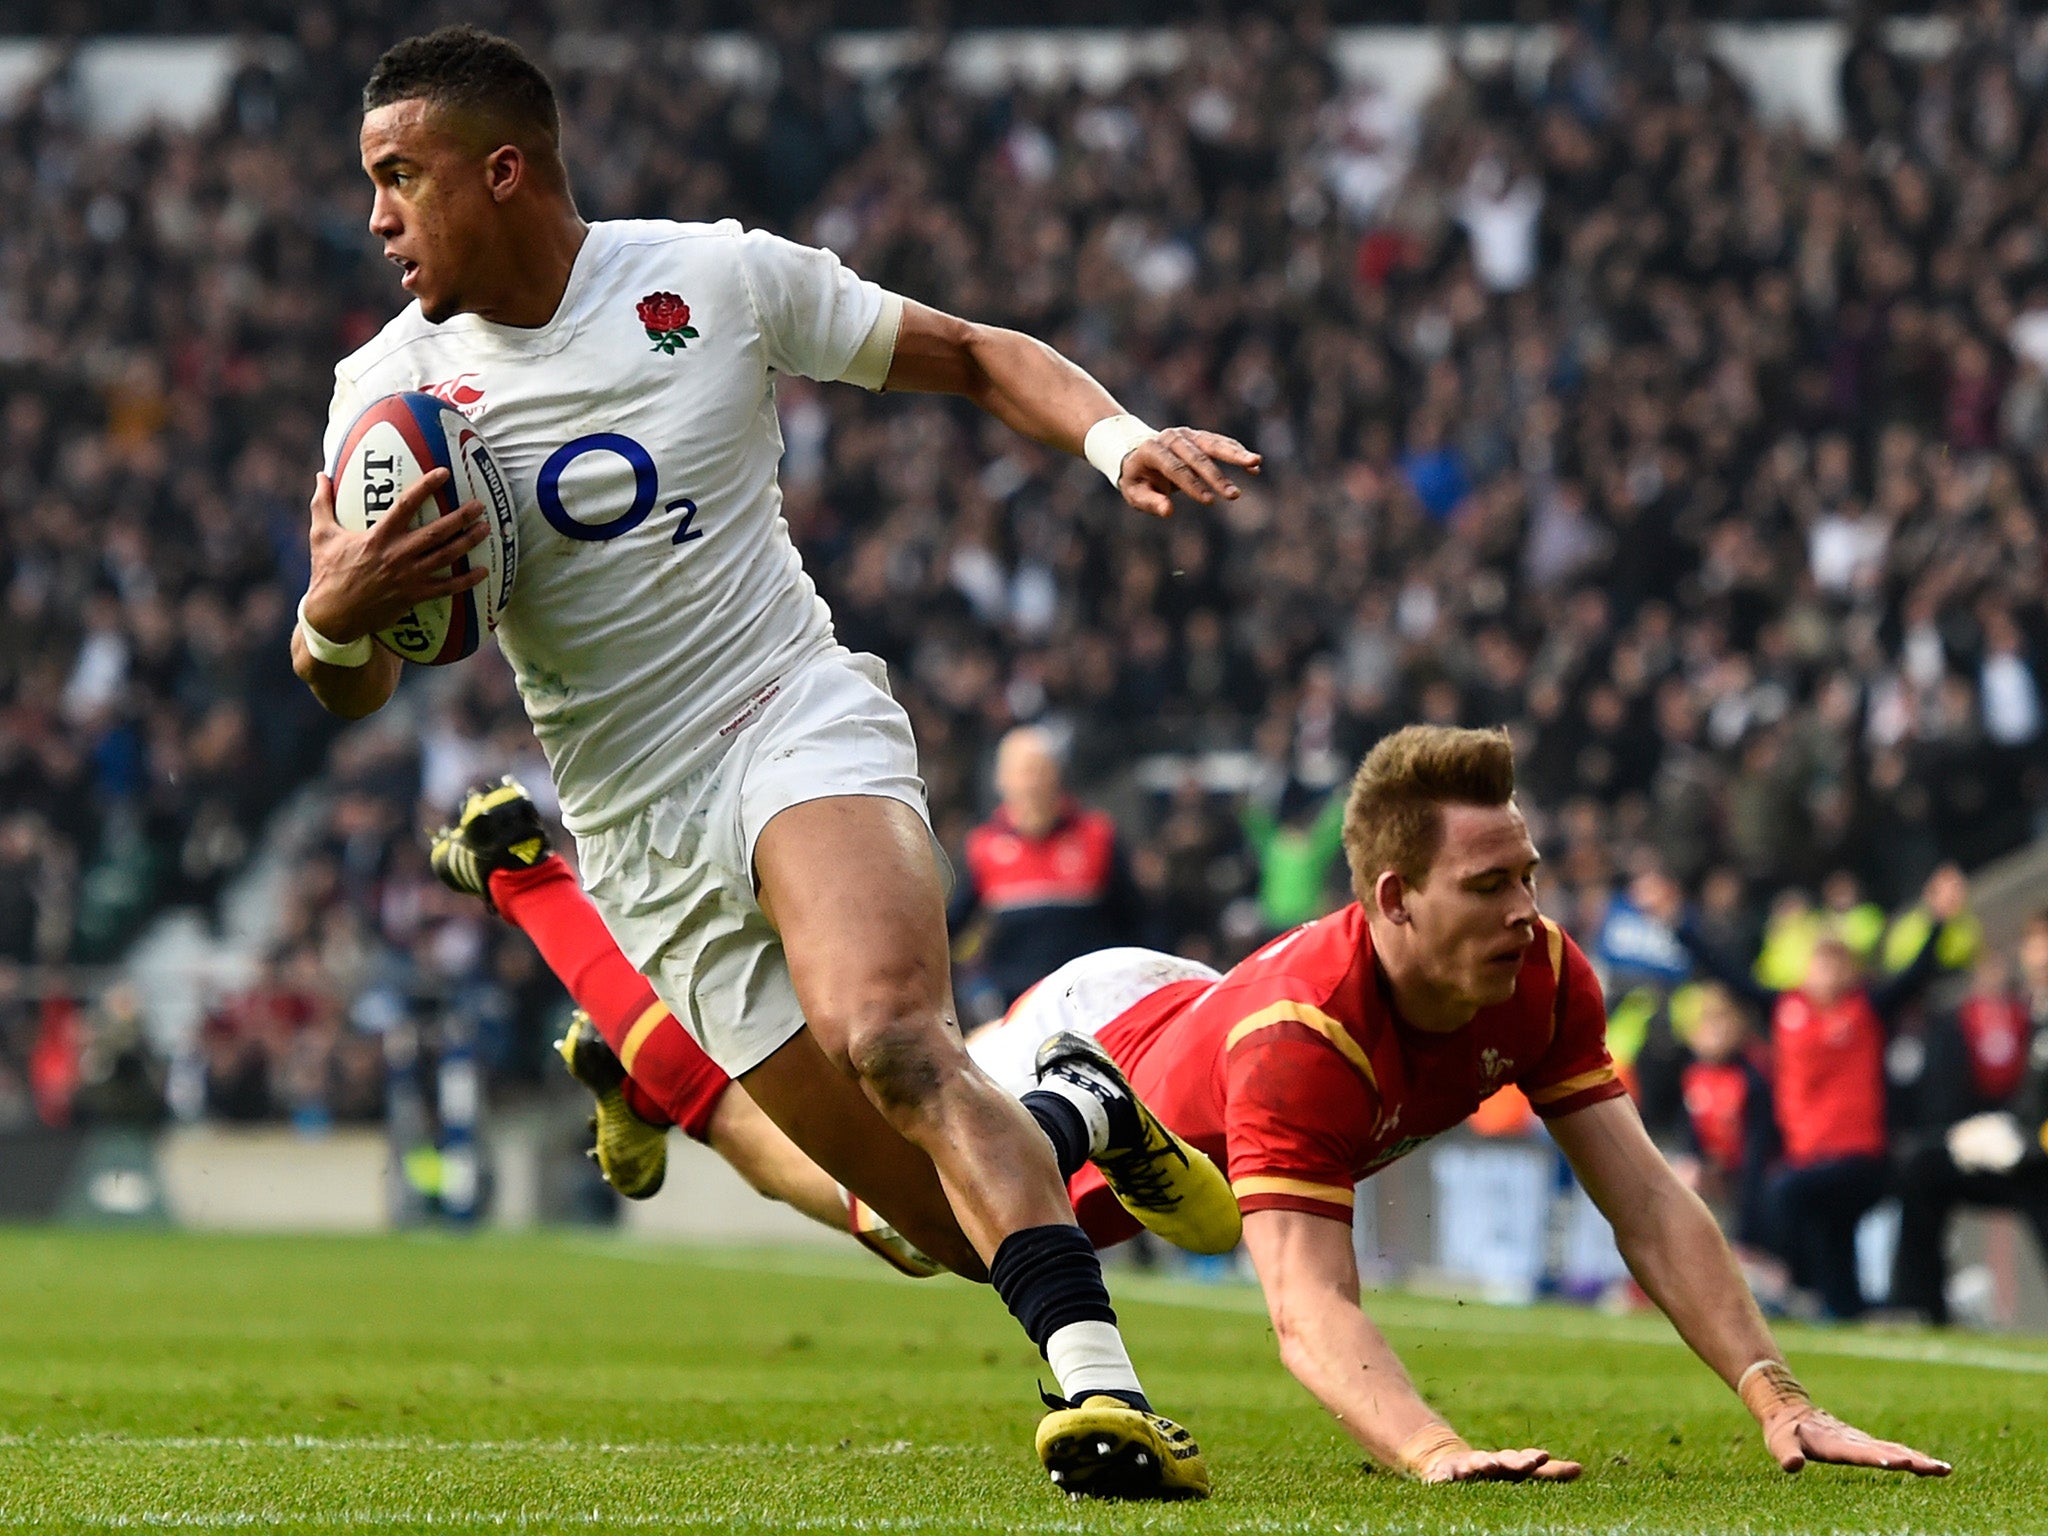 Watson has scored 12 tries in 24 caps for England